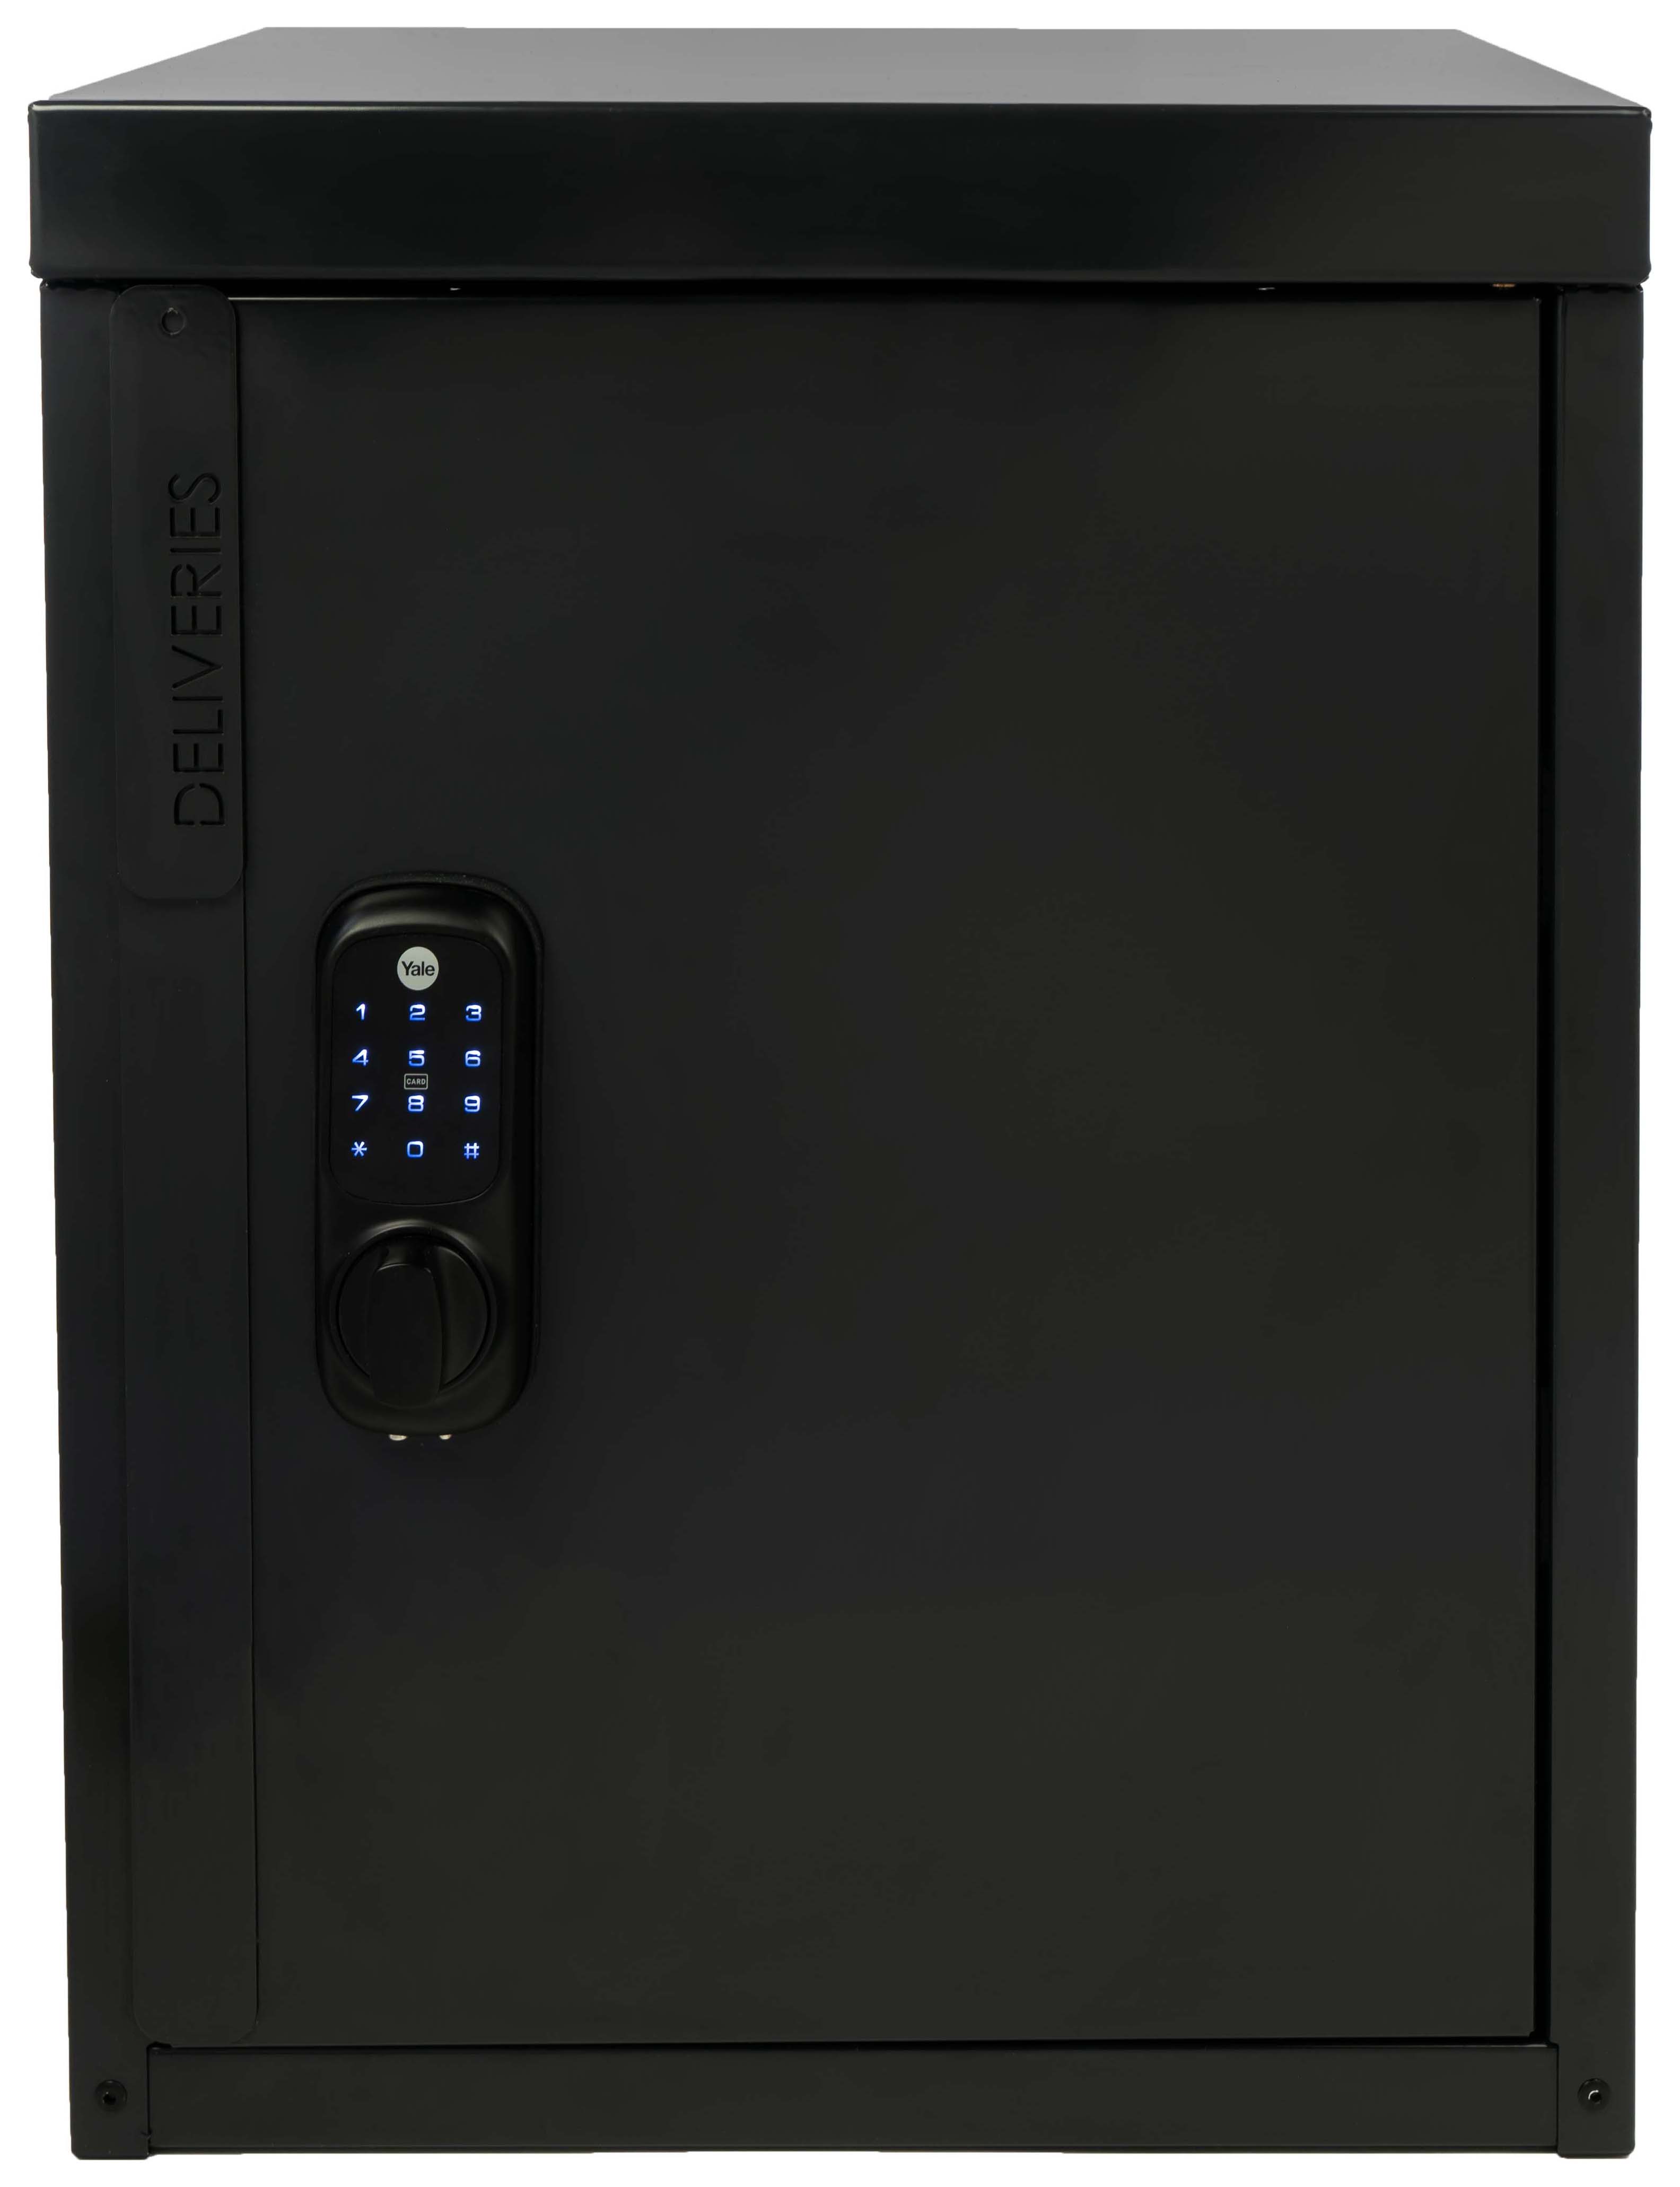 Image of Yale Smart Delivery Box with Black Keyless Lock - Black